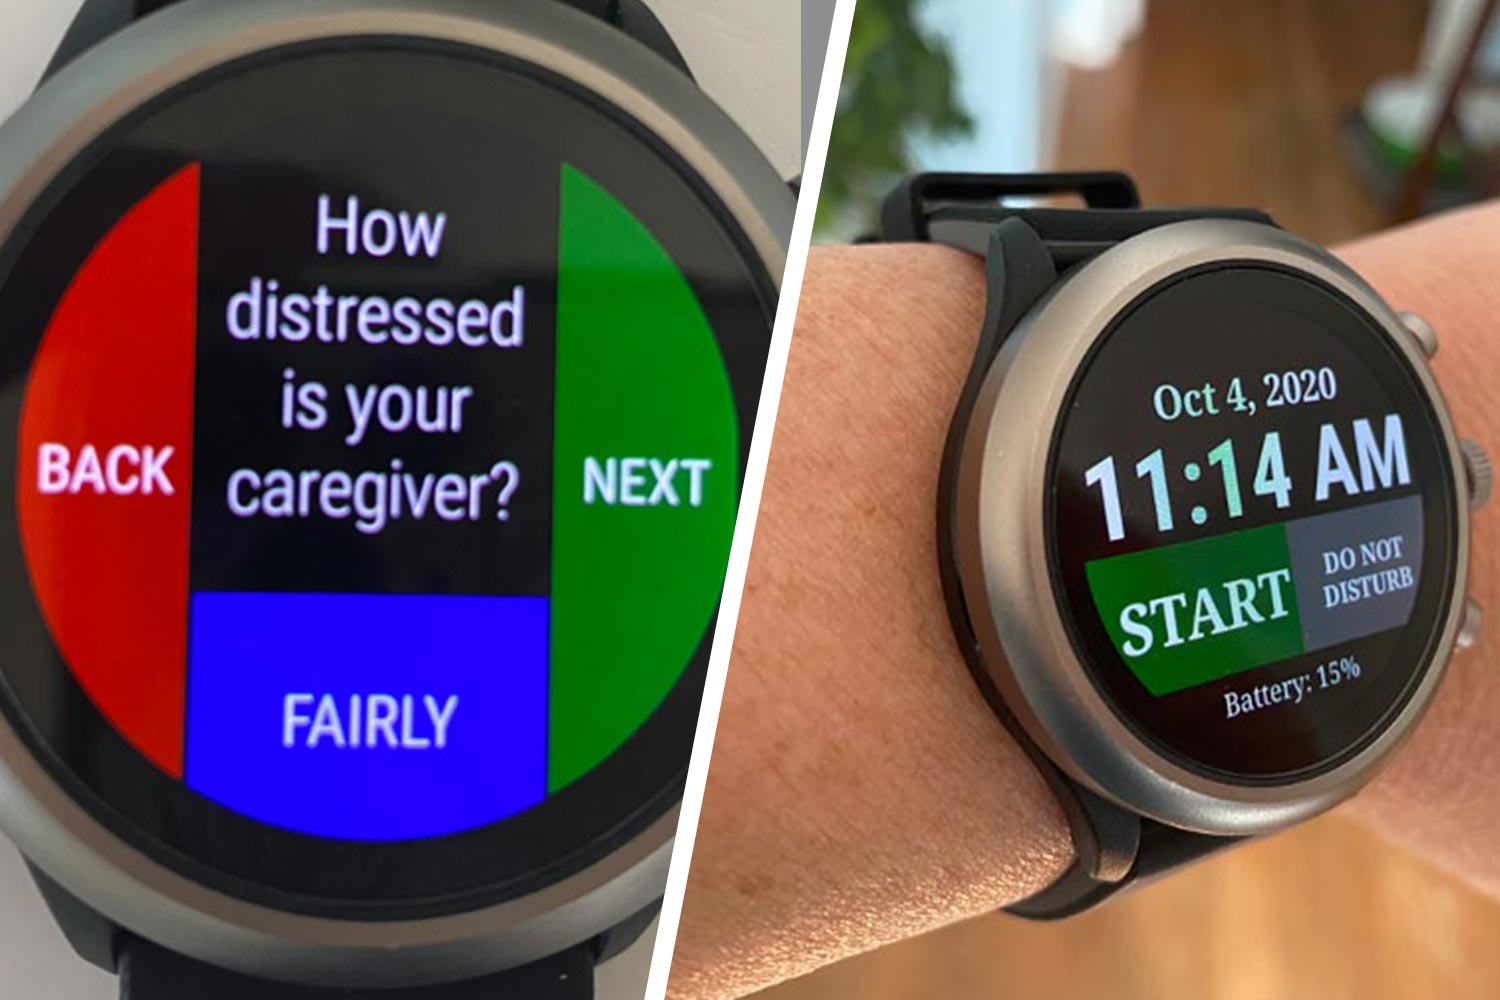 wearable smart watch sensors asking :how distressed is your caregiver, left, and wearable smart watch sensors telling the time